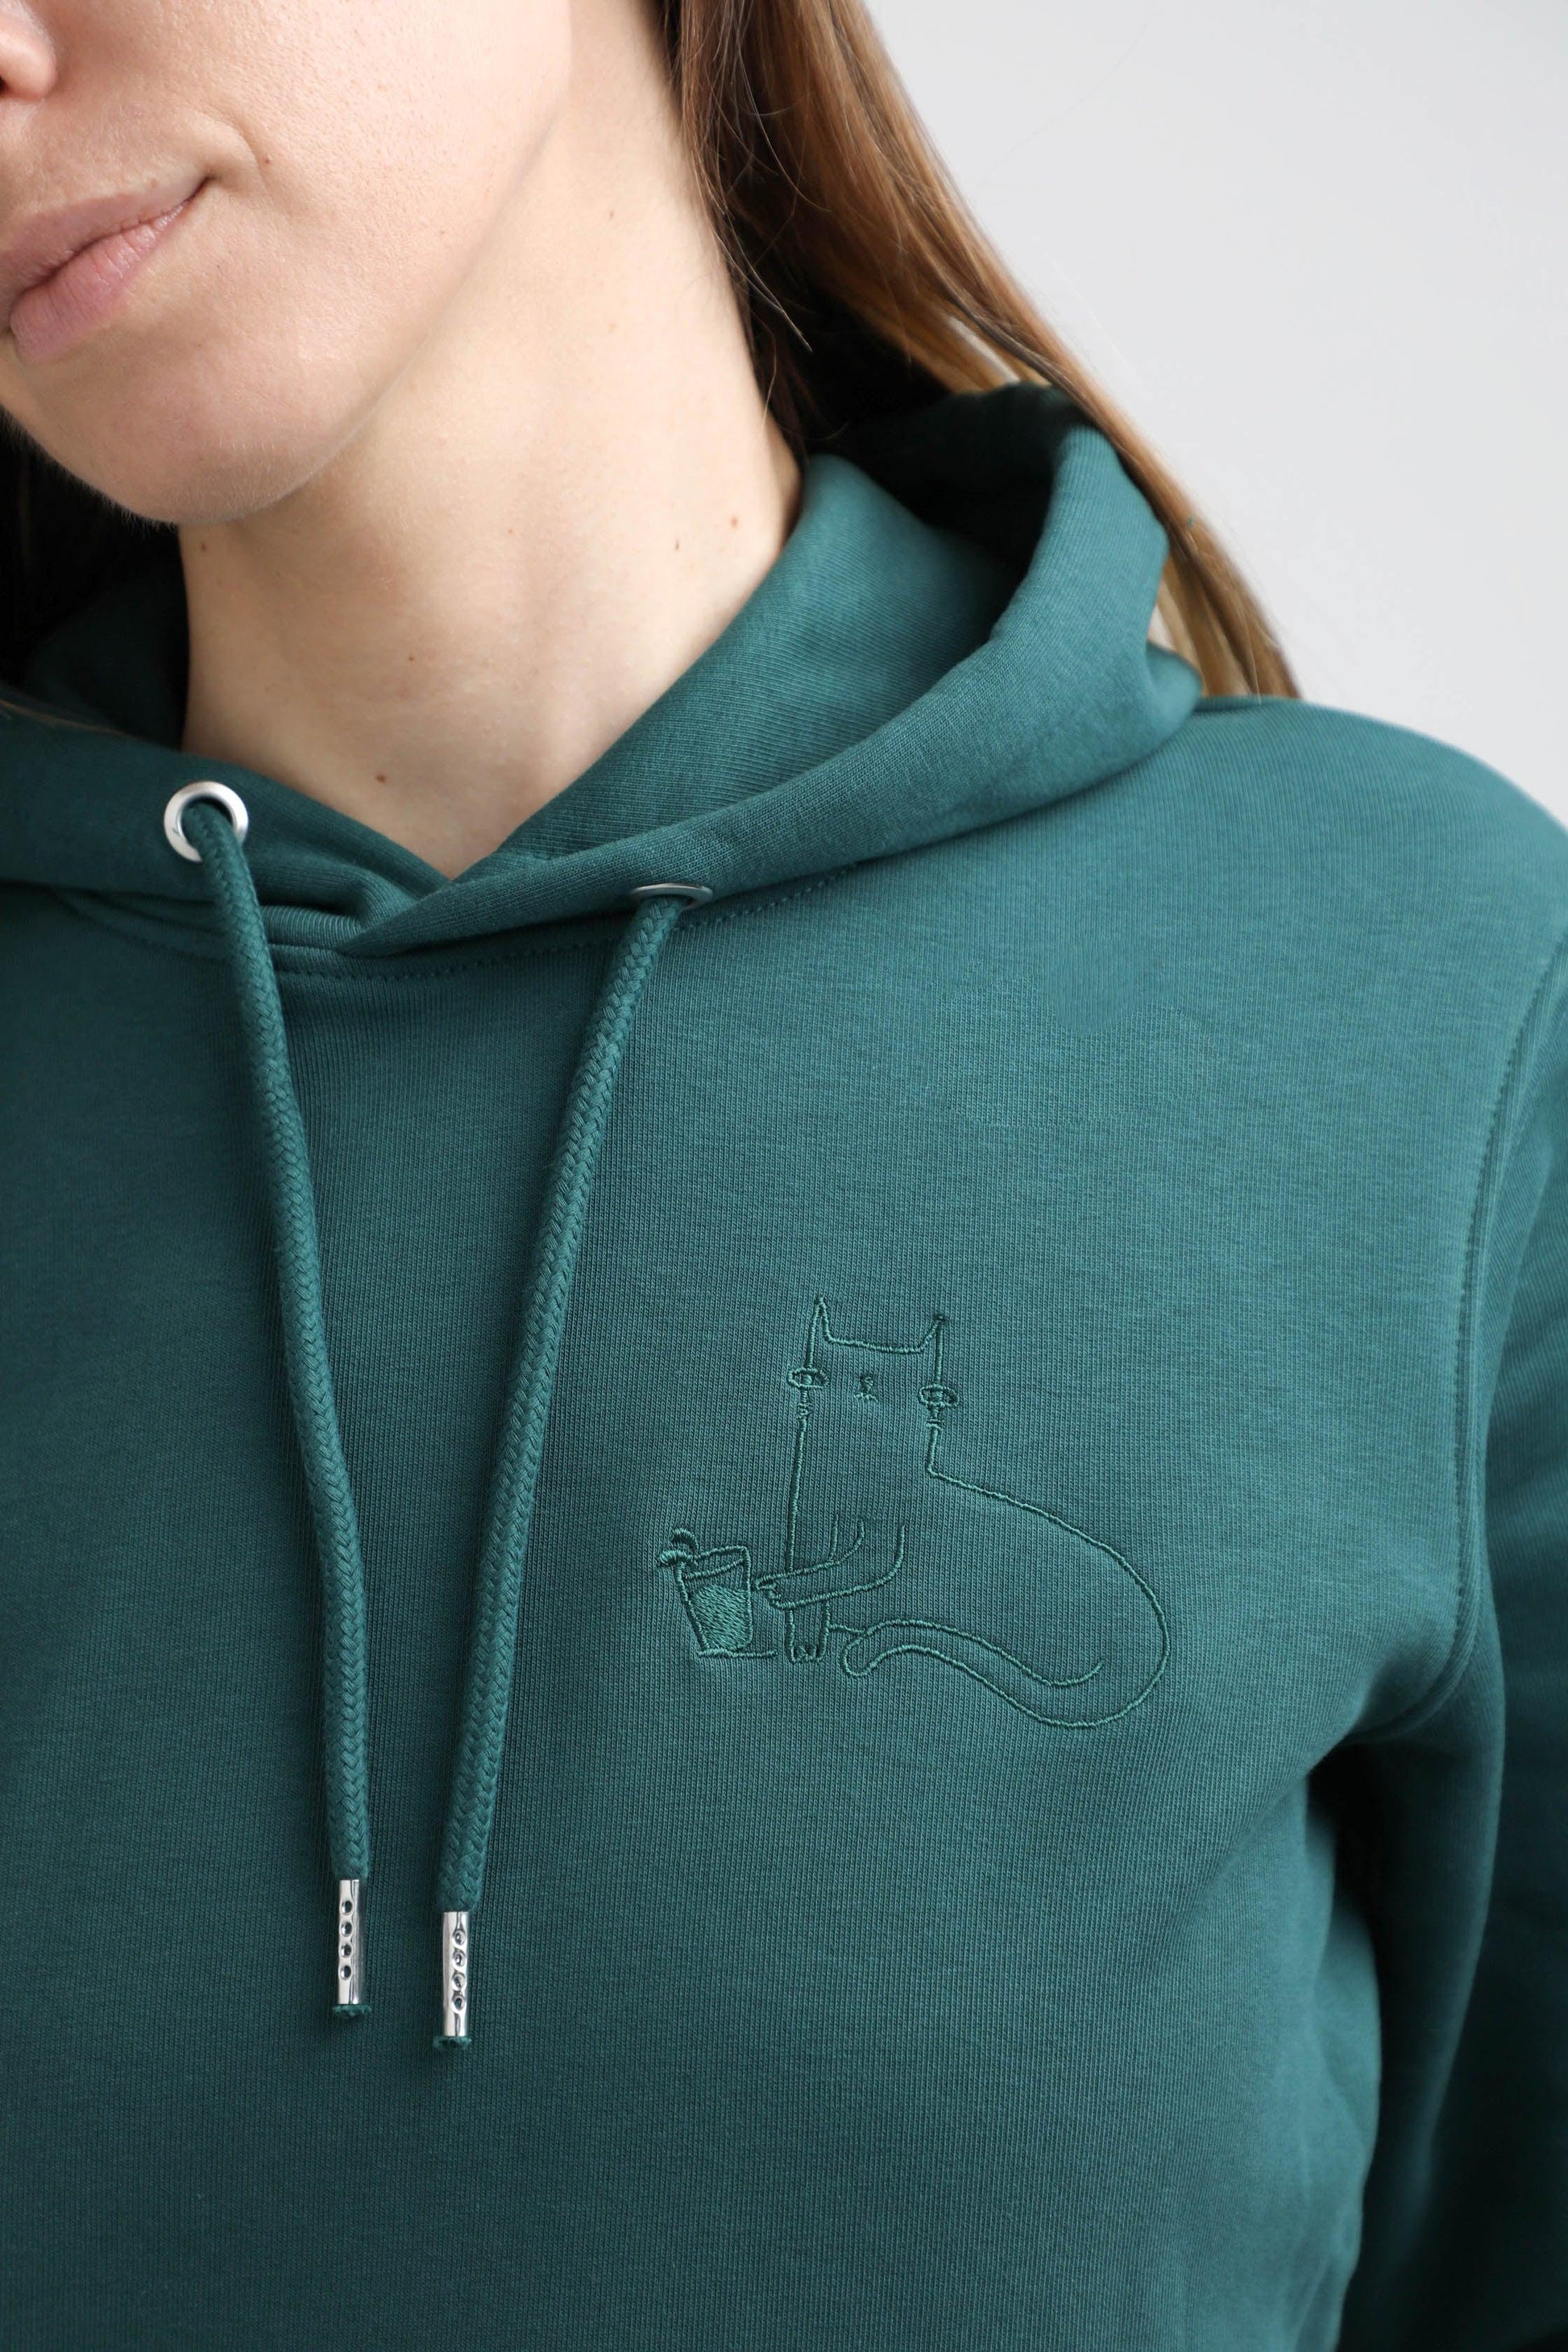 S available only | Cat | Hoodie with embroidered cat. Regular fit | Unisex - premium dog goods handmade in Europe by animalistus